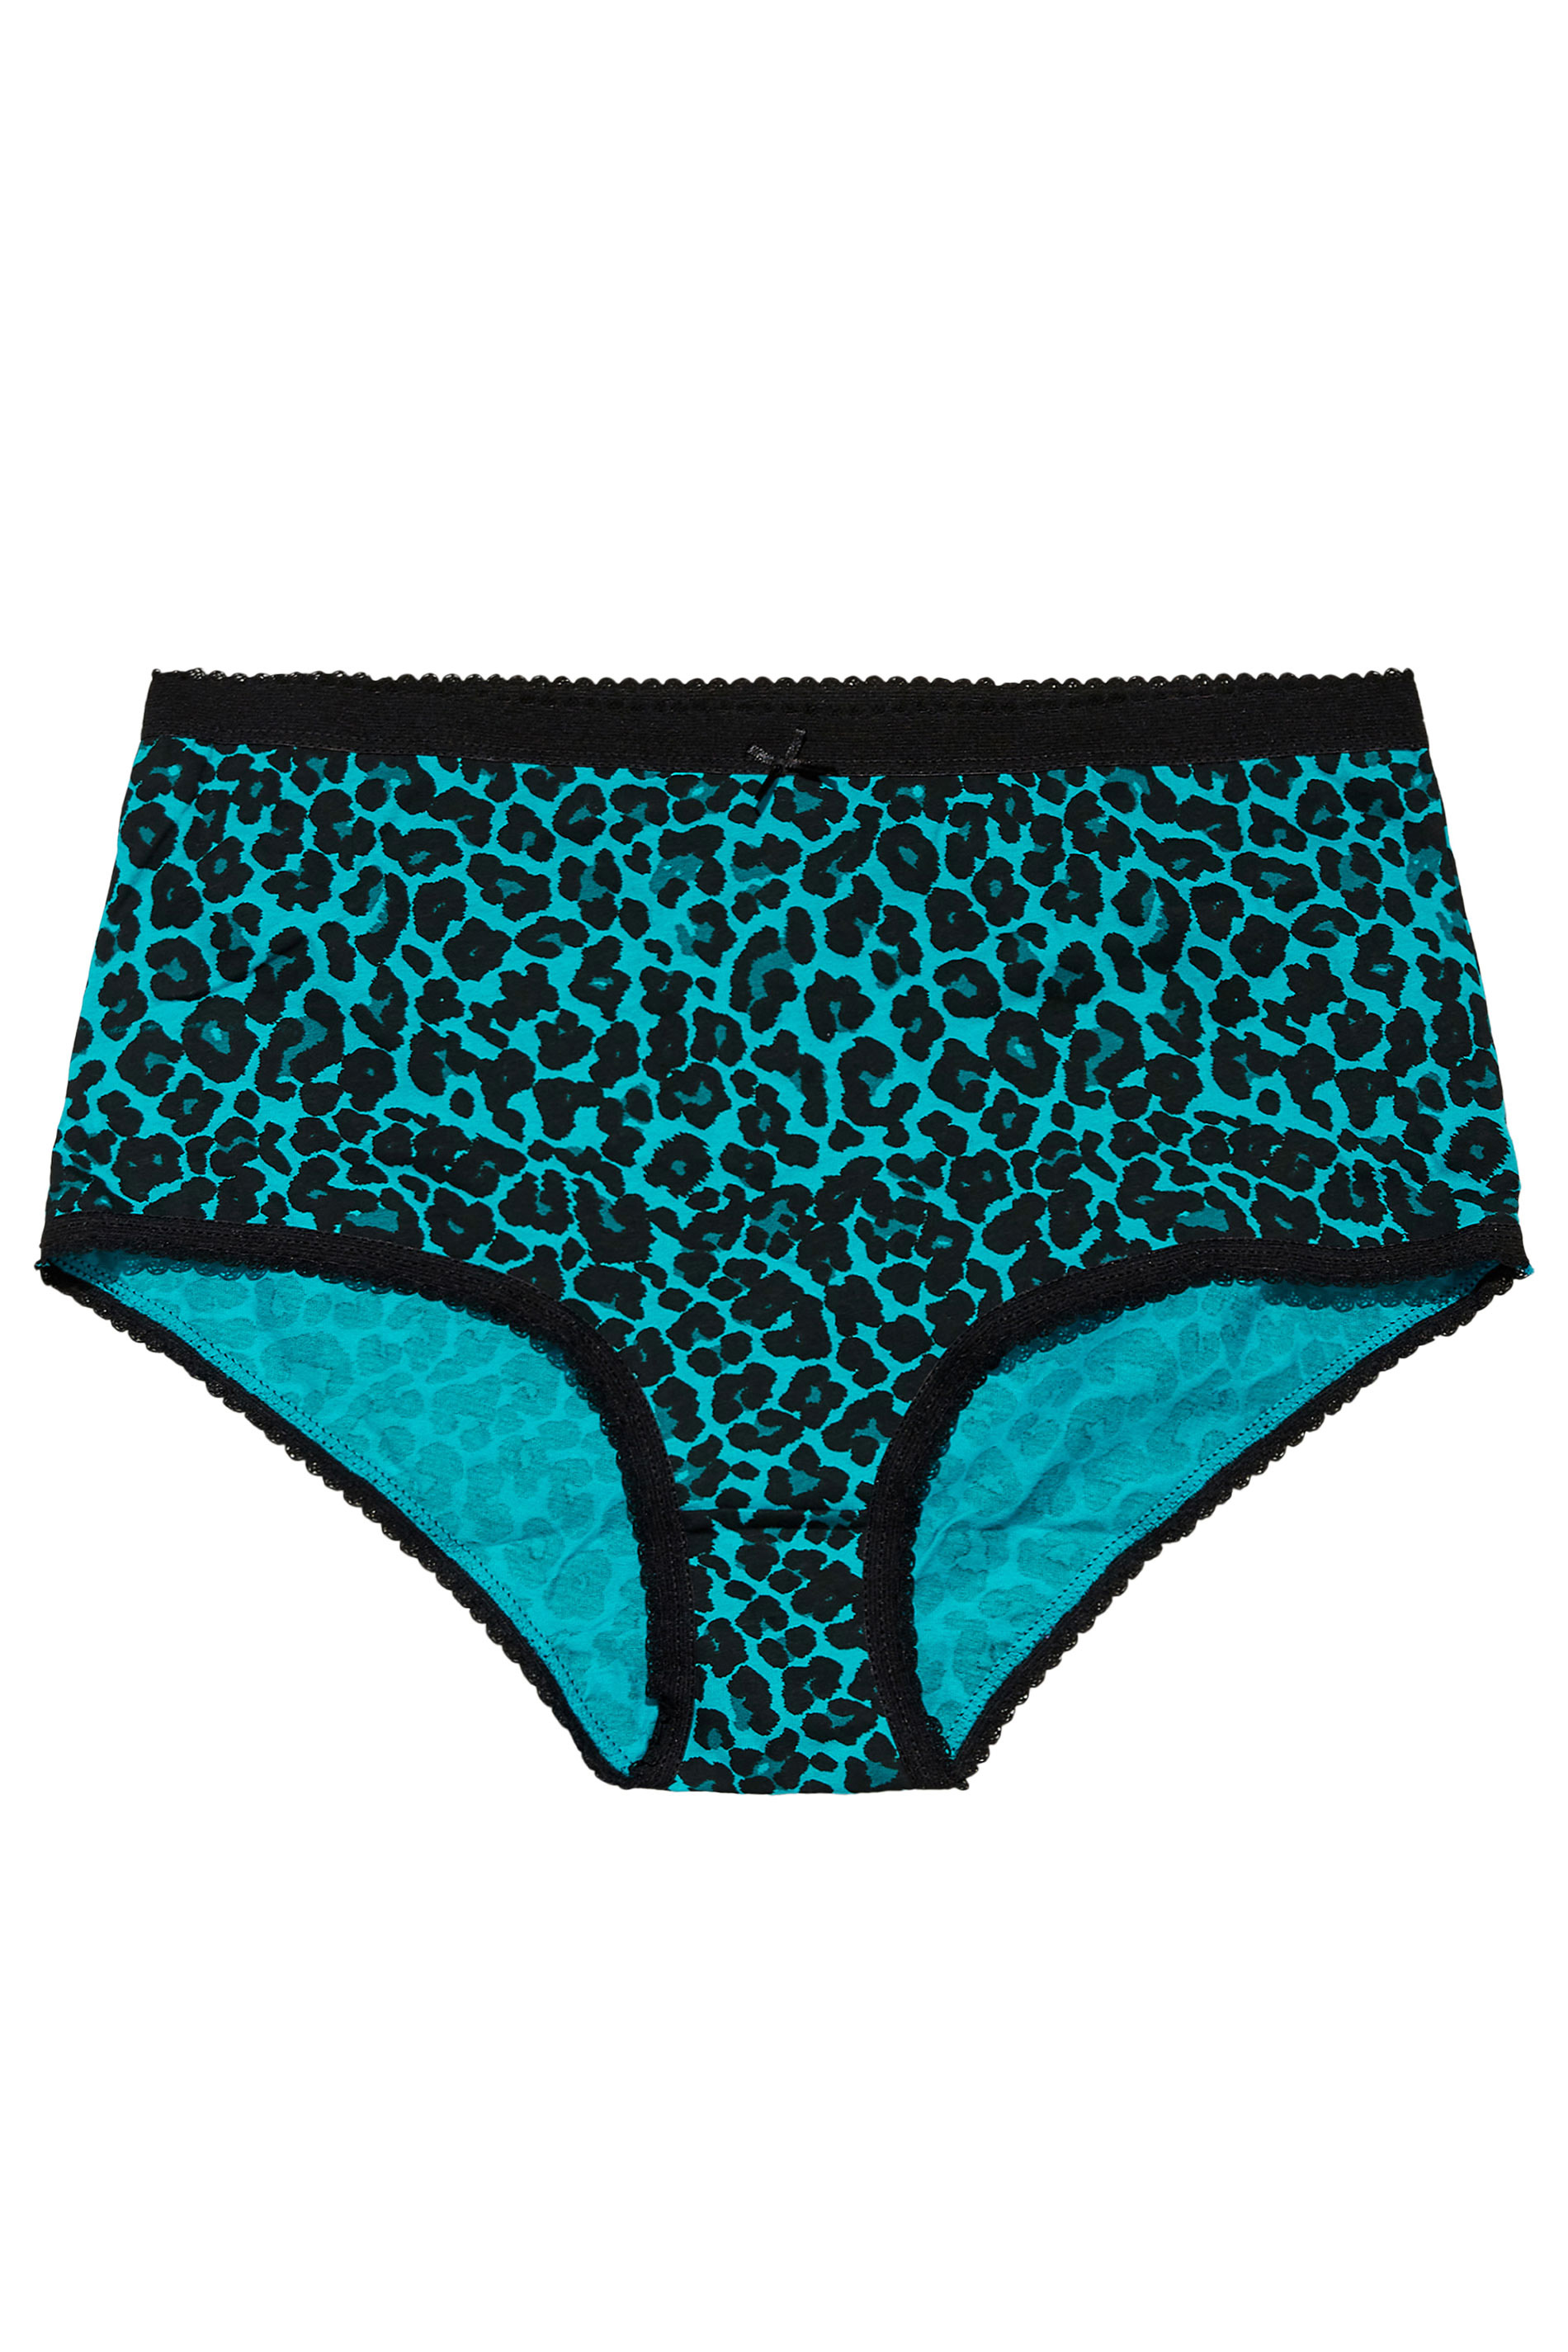 Plus Size 5 PACK Black & Teal Blue Animal Print Full Briefs | Yours Clothing  3